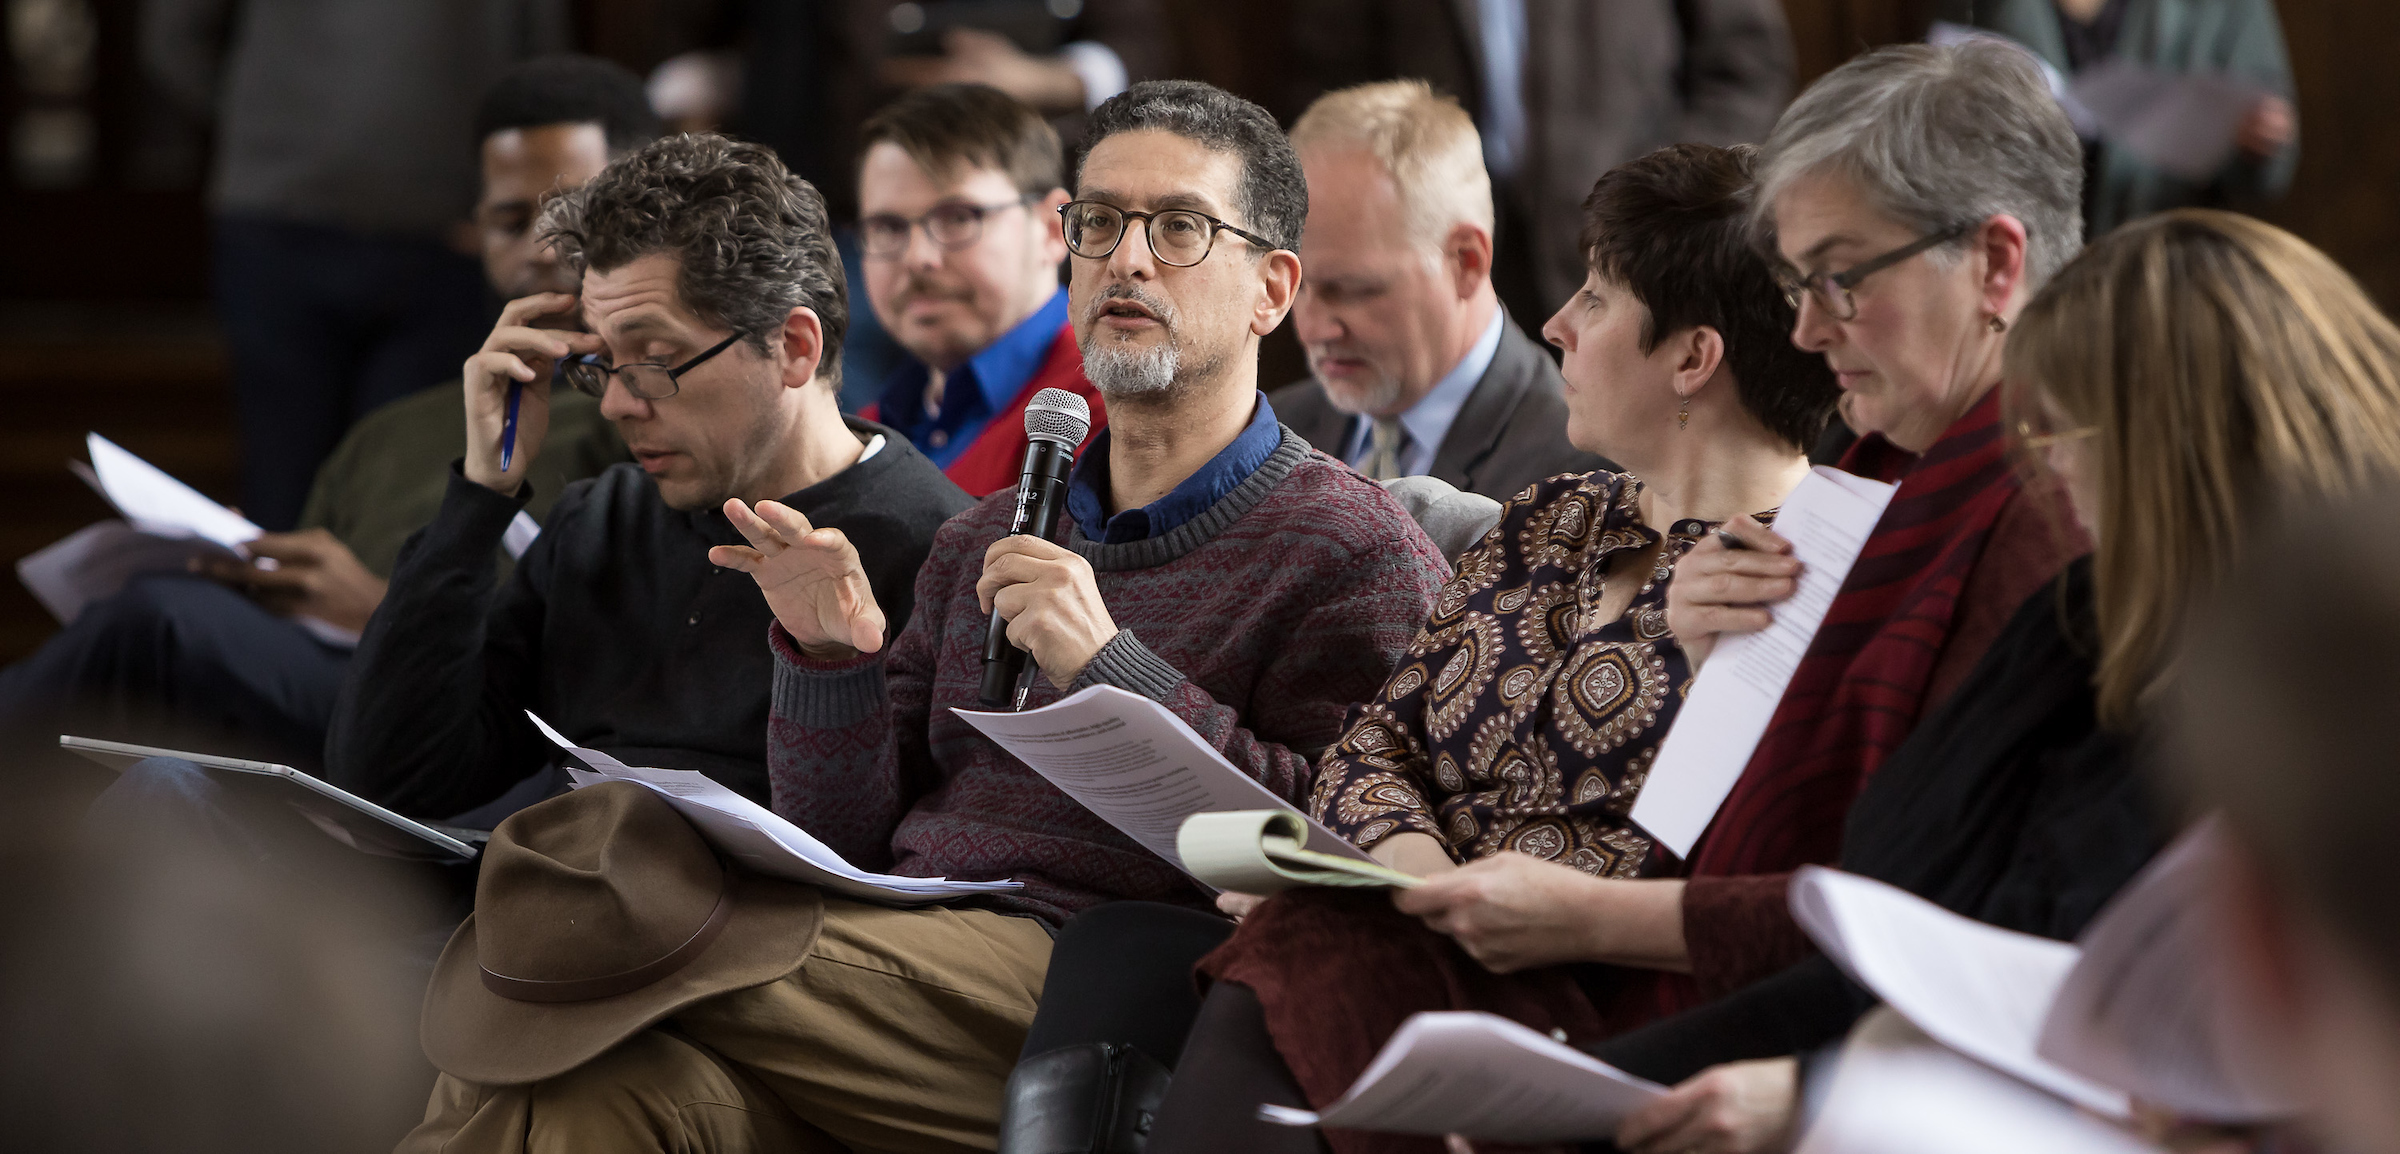 Khaled Keshk, associate professor and chair of Religious Studies, comments during a town hall